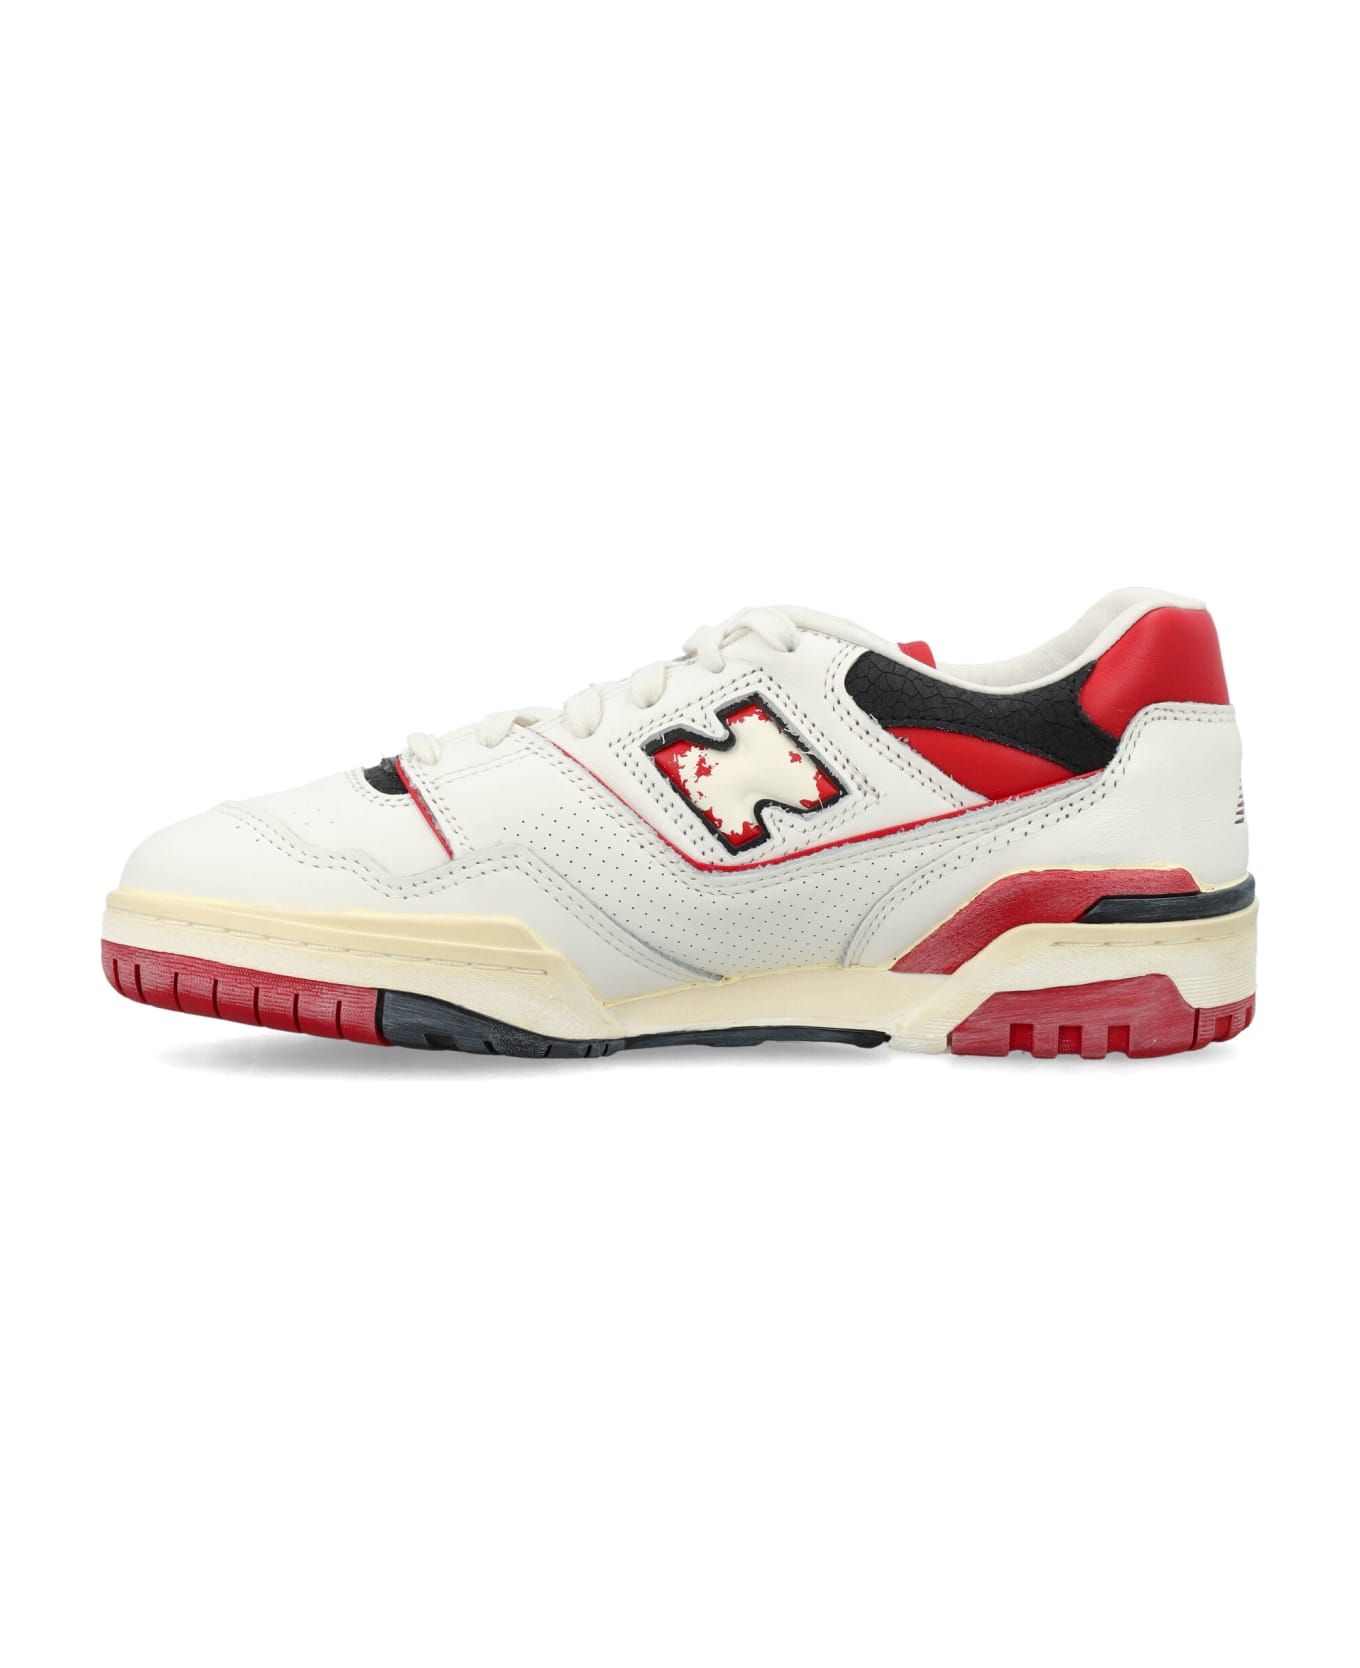 New Balance 550 Sneakers - WHITE RED スニーカー